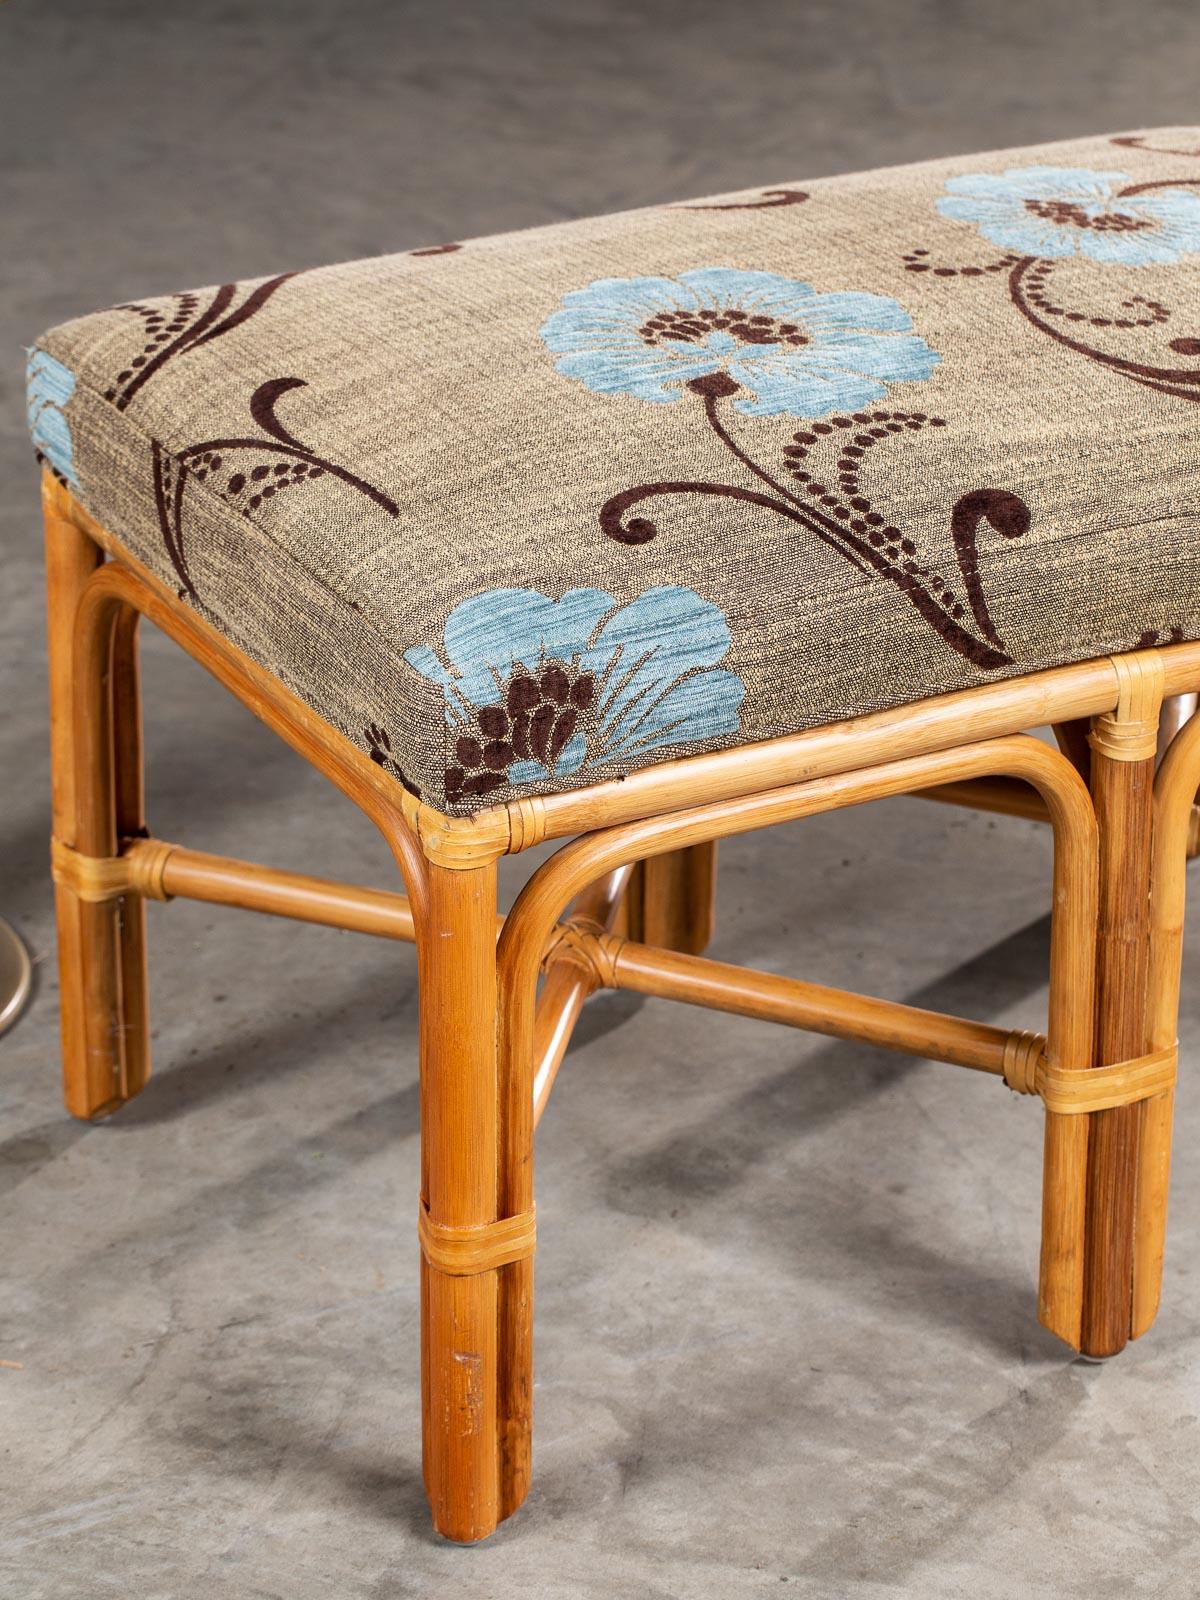 20th Century Vintage McGuire Style Bamboo Rattan Leather Bench Stool Seat, circa 1970 For Sale